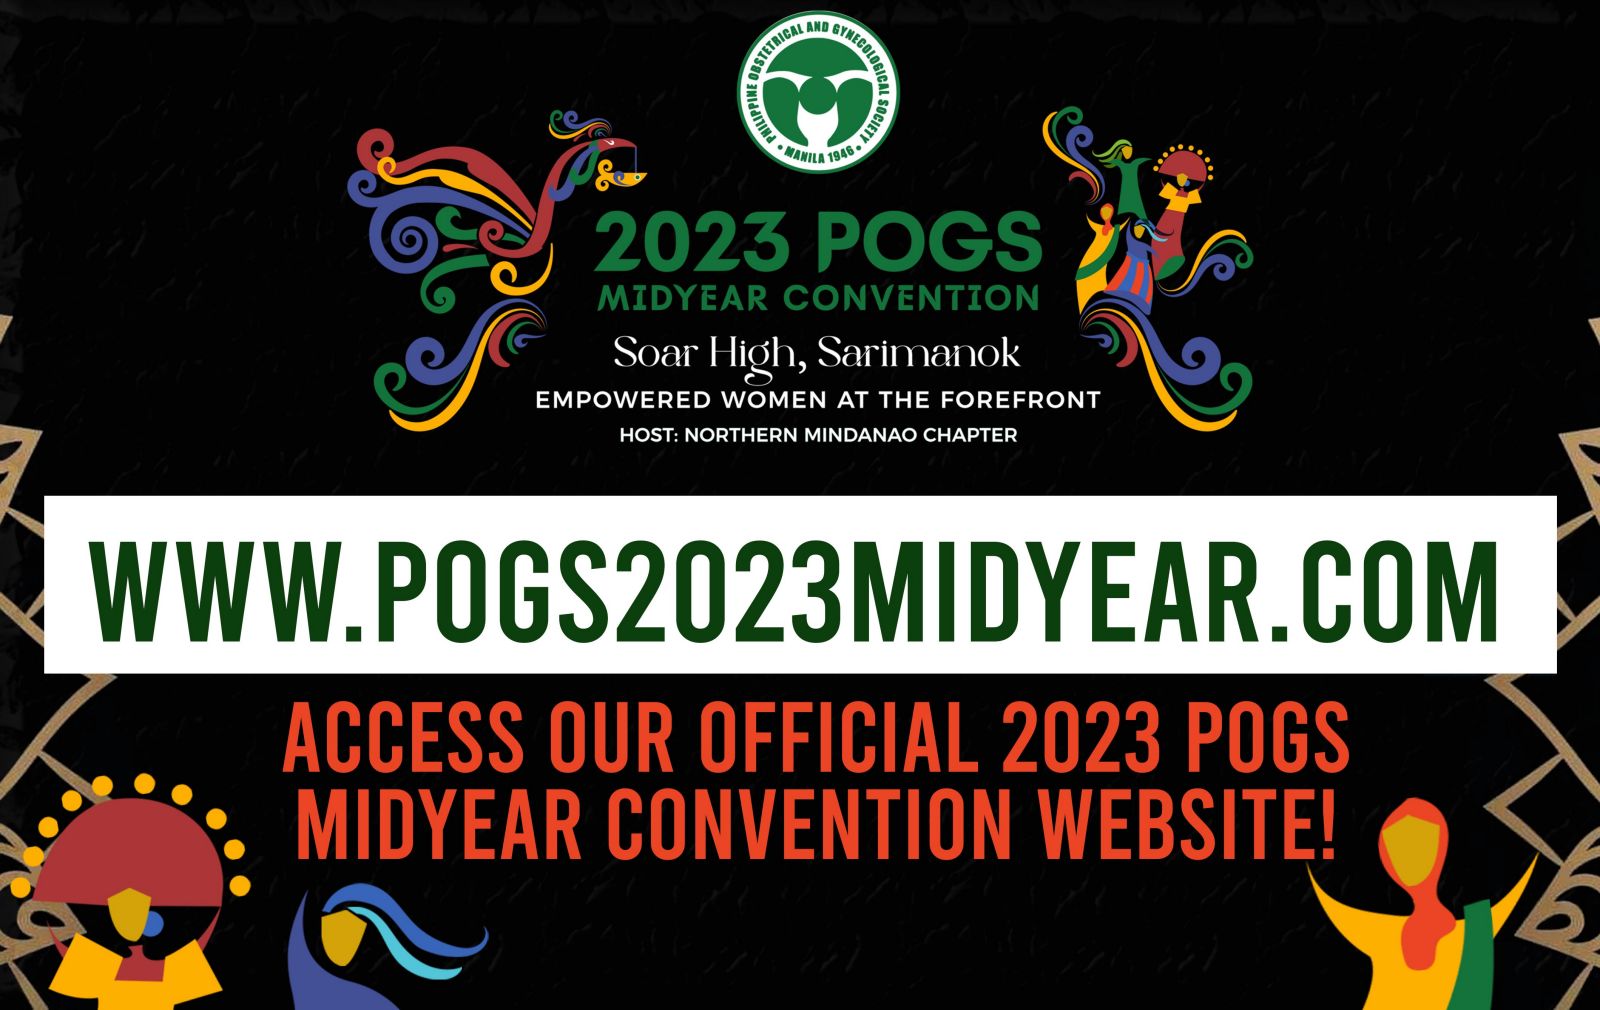 Midyear Convention POGS Website